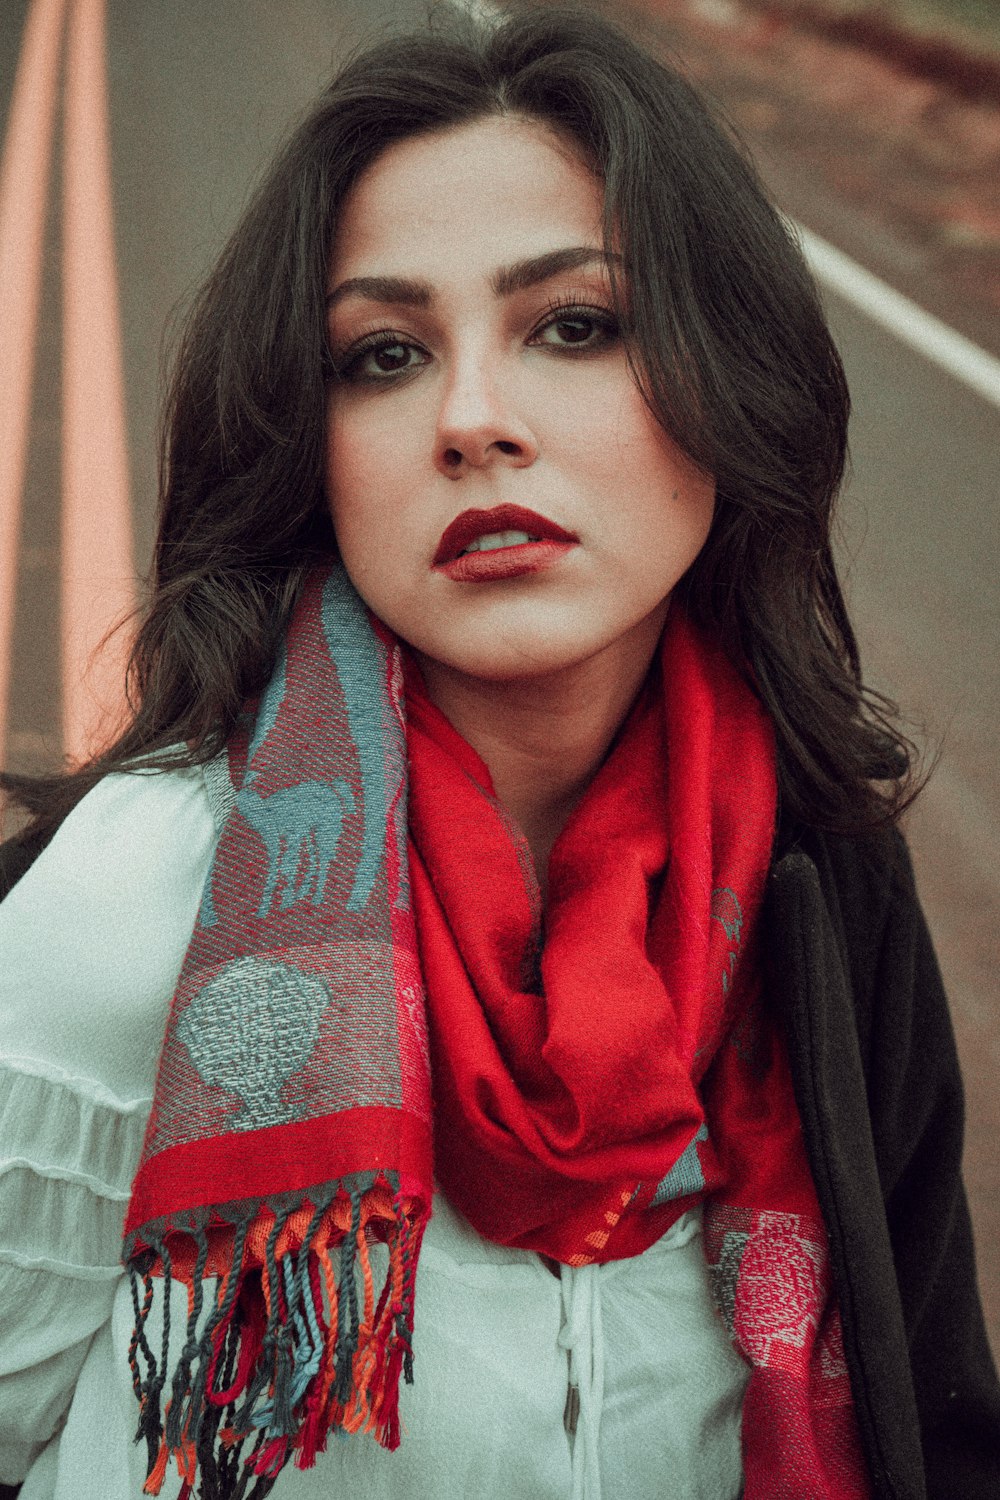 a woman wearing a red scarf and a black jacket